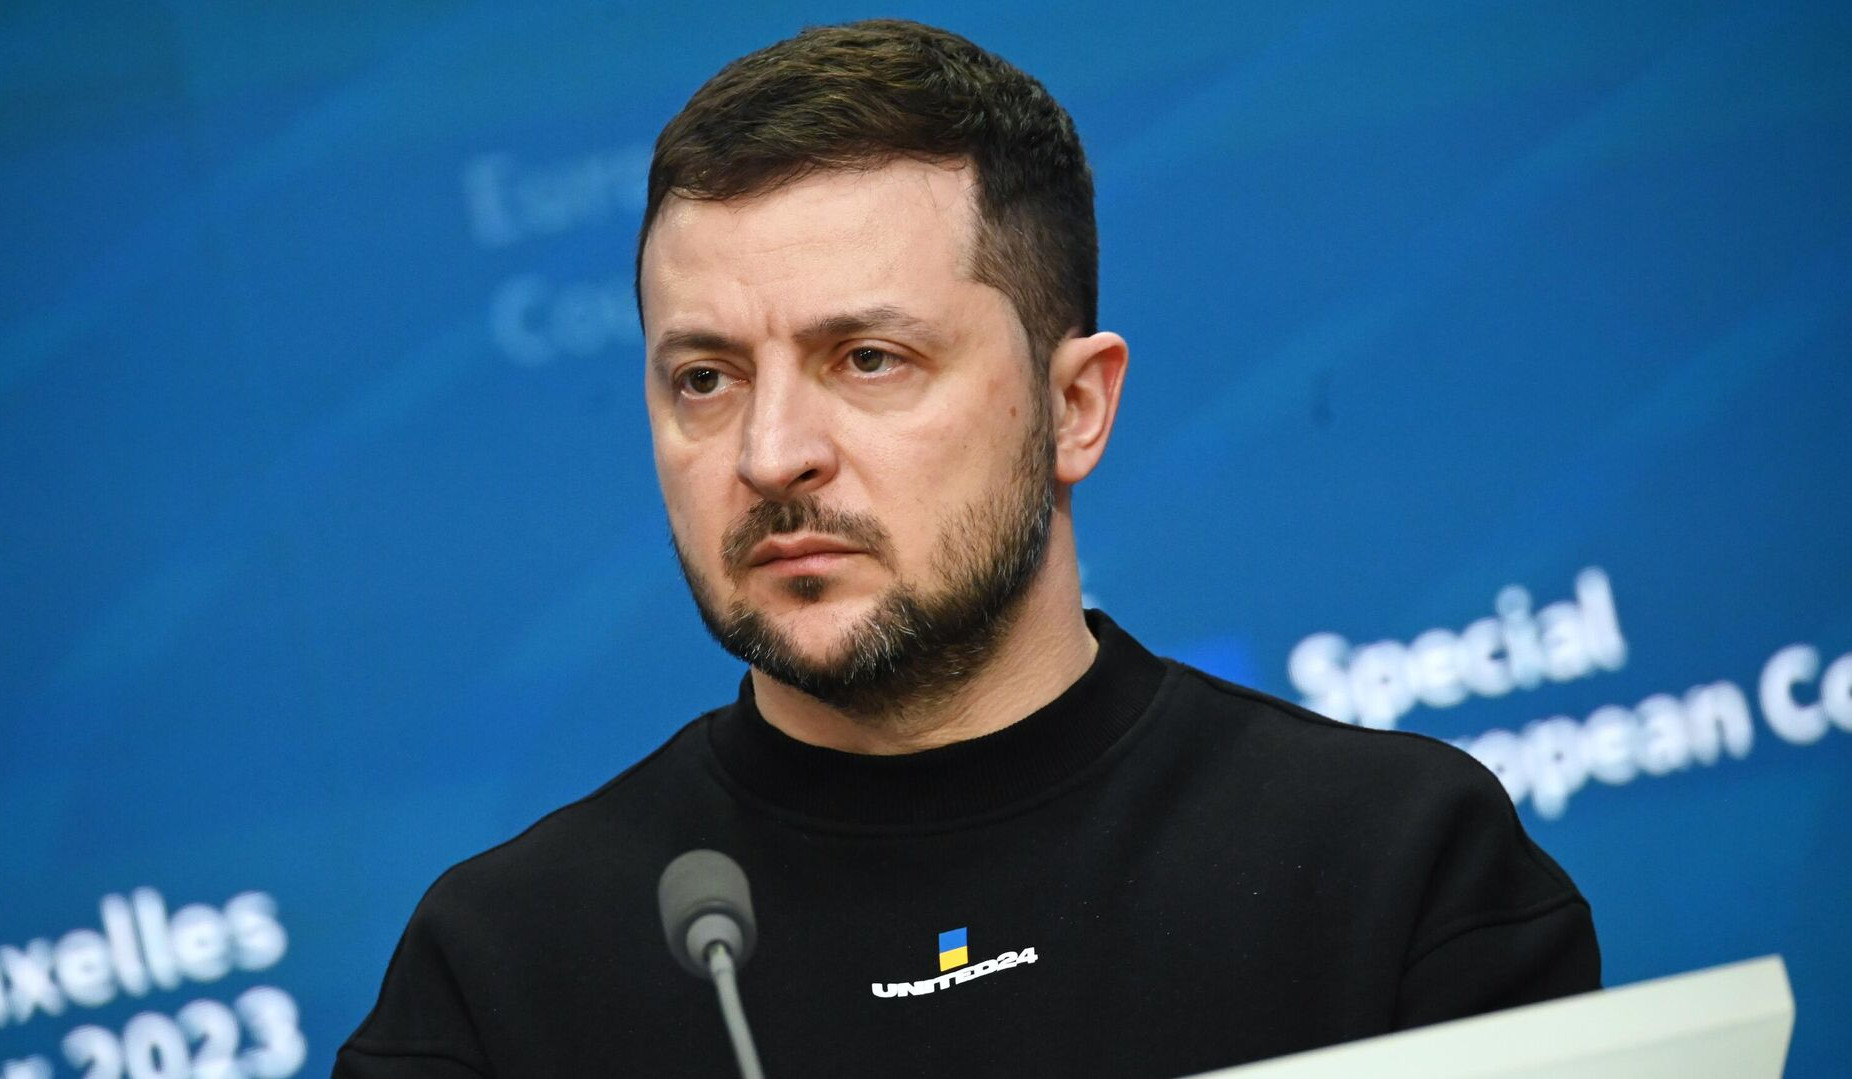 President Zelenskyy vows to give Russia an ‘unpleasant surprise’ when offensive begins